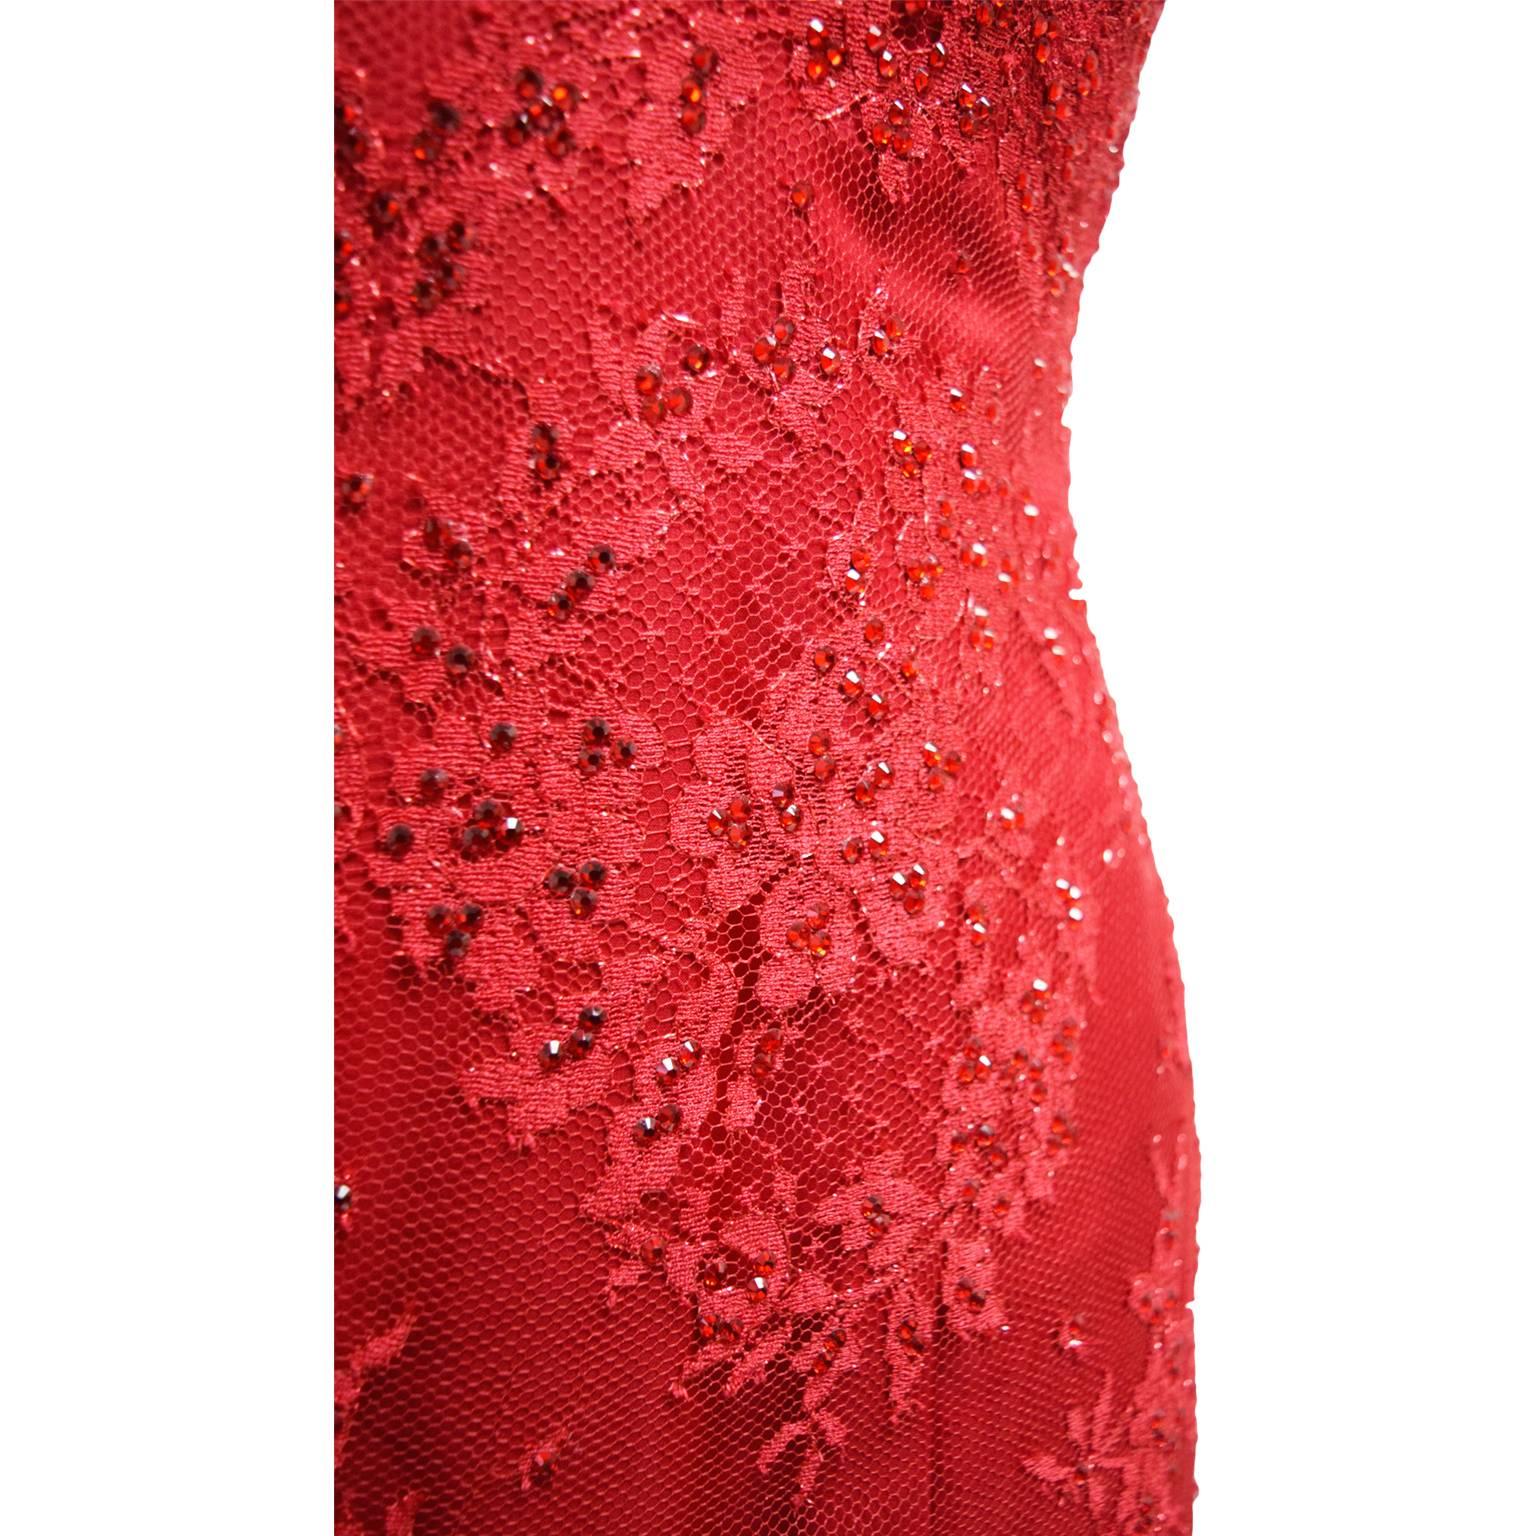 Baracci Red Floral Lace Sweetheart Dress with Lace Up Back Closure   In Excellent Condition For Sale In Henrico, VA